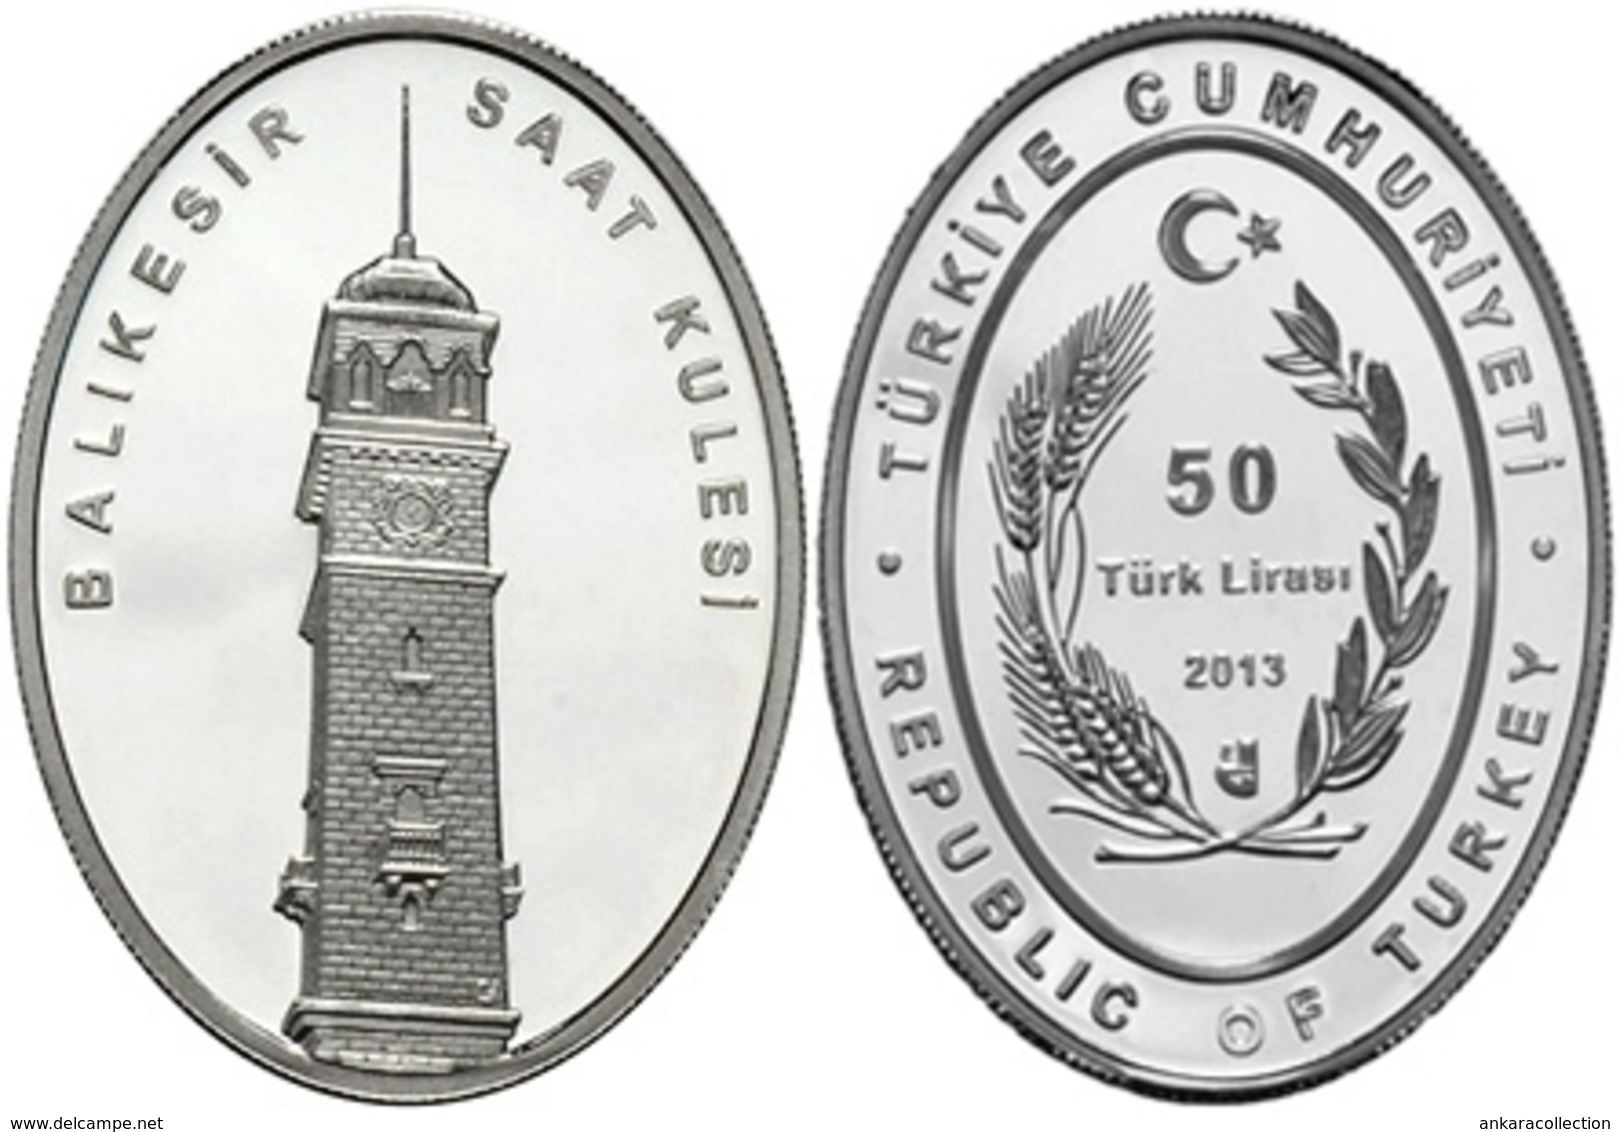 AC - BALIKESIR CLOCK TOWER CLOCK TOWER SERIES # 4 COMMEMORATIVE SILVER COIN TURKEY 2013 PROOF UNCIRCULATED - Unclassified